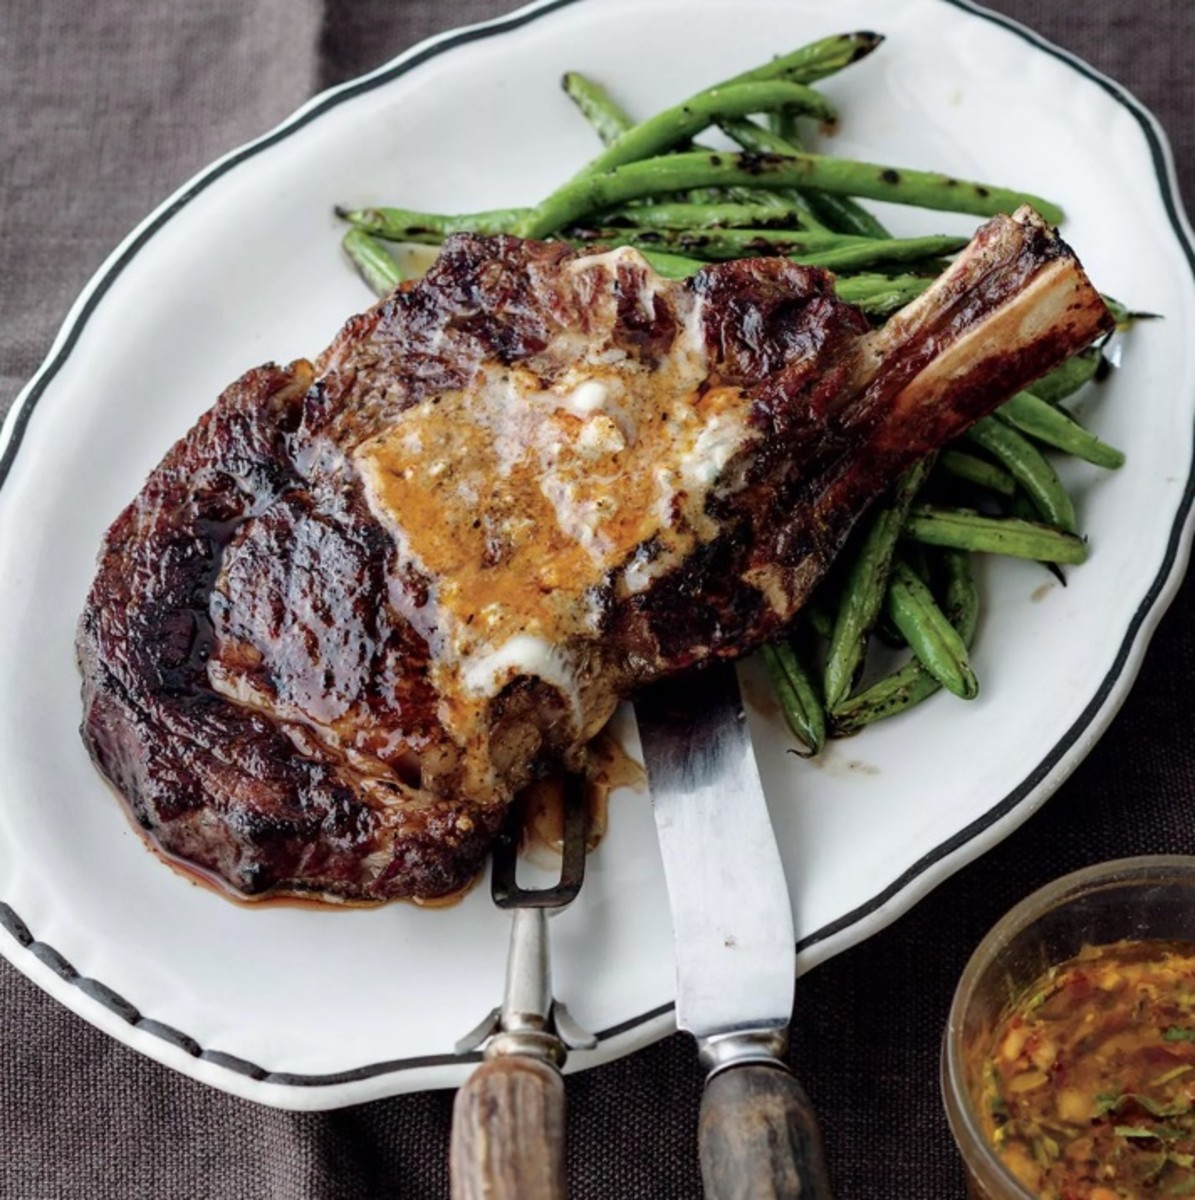 Curtis Stone's Ribeye Steak: Signature Dishes of Famous Chefs